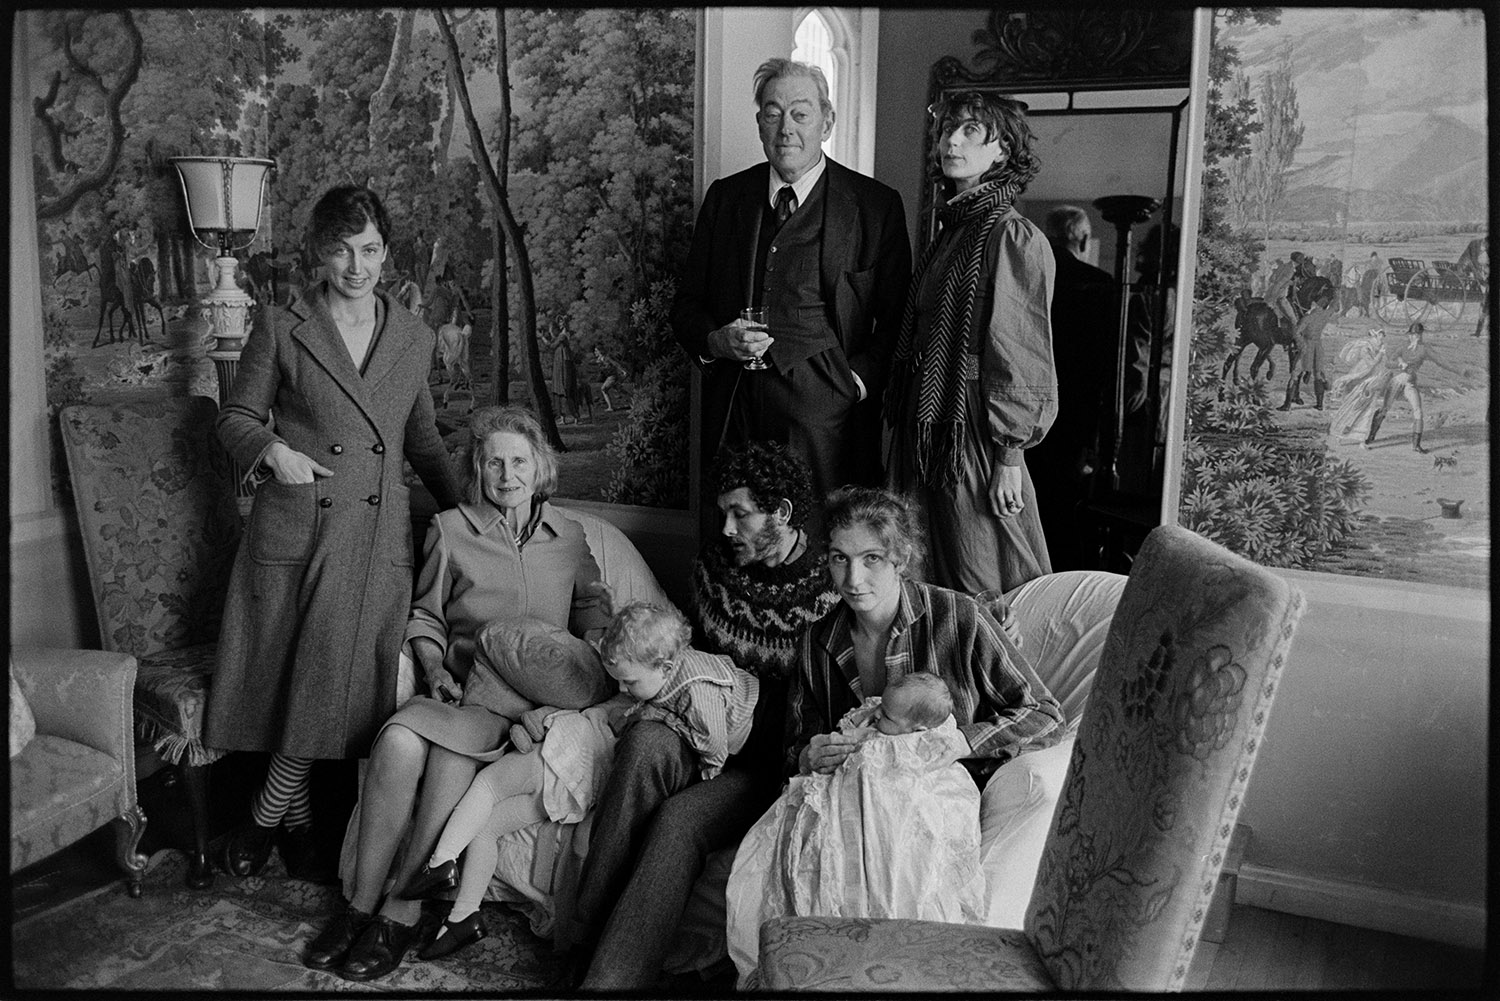 Christening, family groups at home after service, family taking photographs. <br />
[Several generations of the Rous family posing for a photograph in a room at Clovelly Court, after a christening. A woman sat on a chair is holding the child which has been christened. Tapestries are hanging on the walls.]